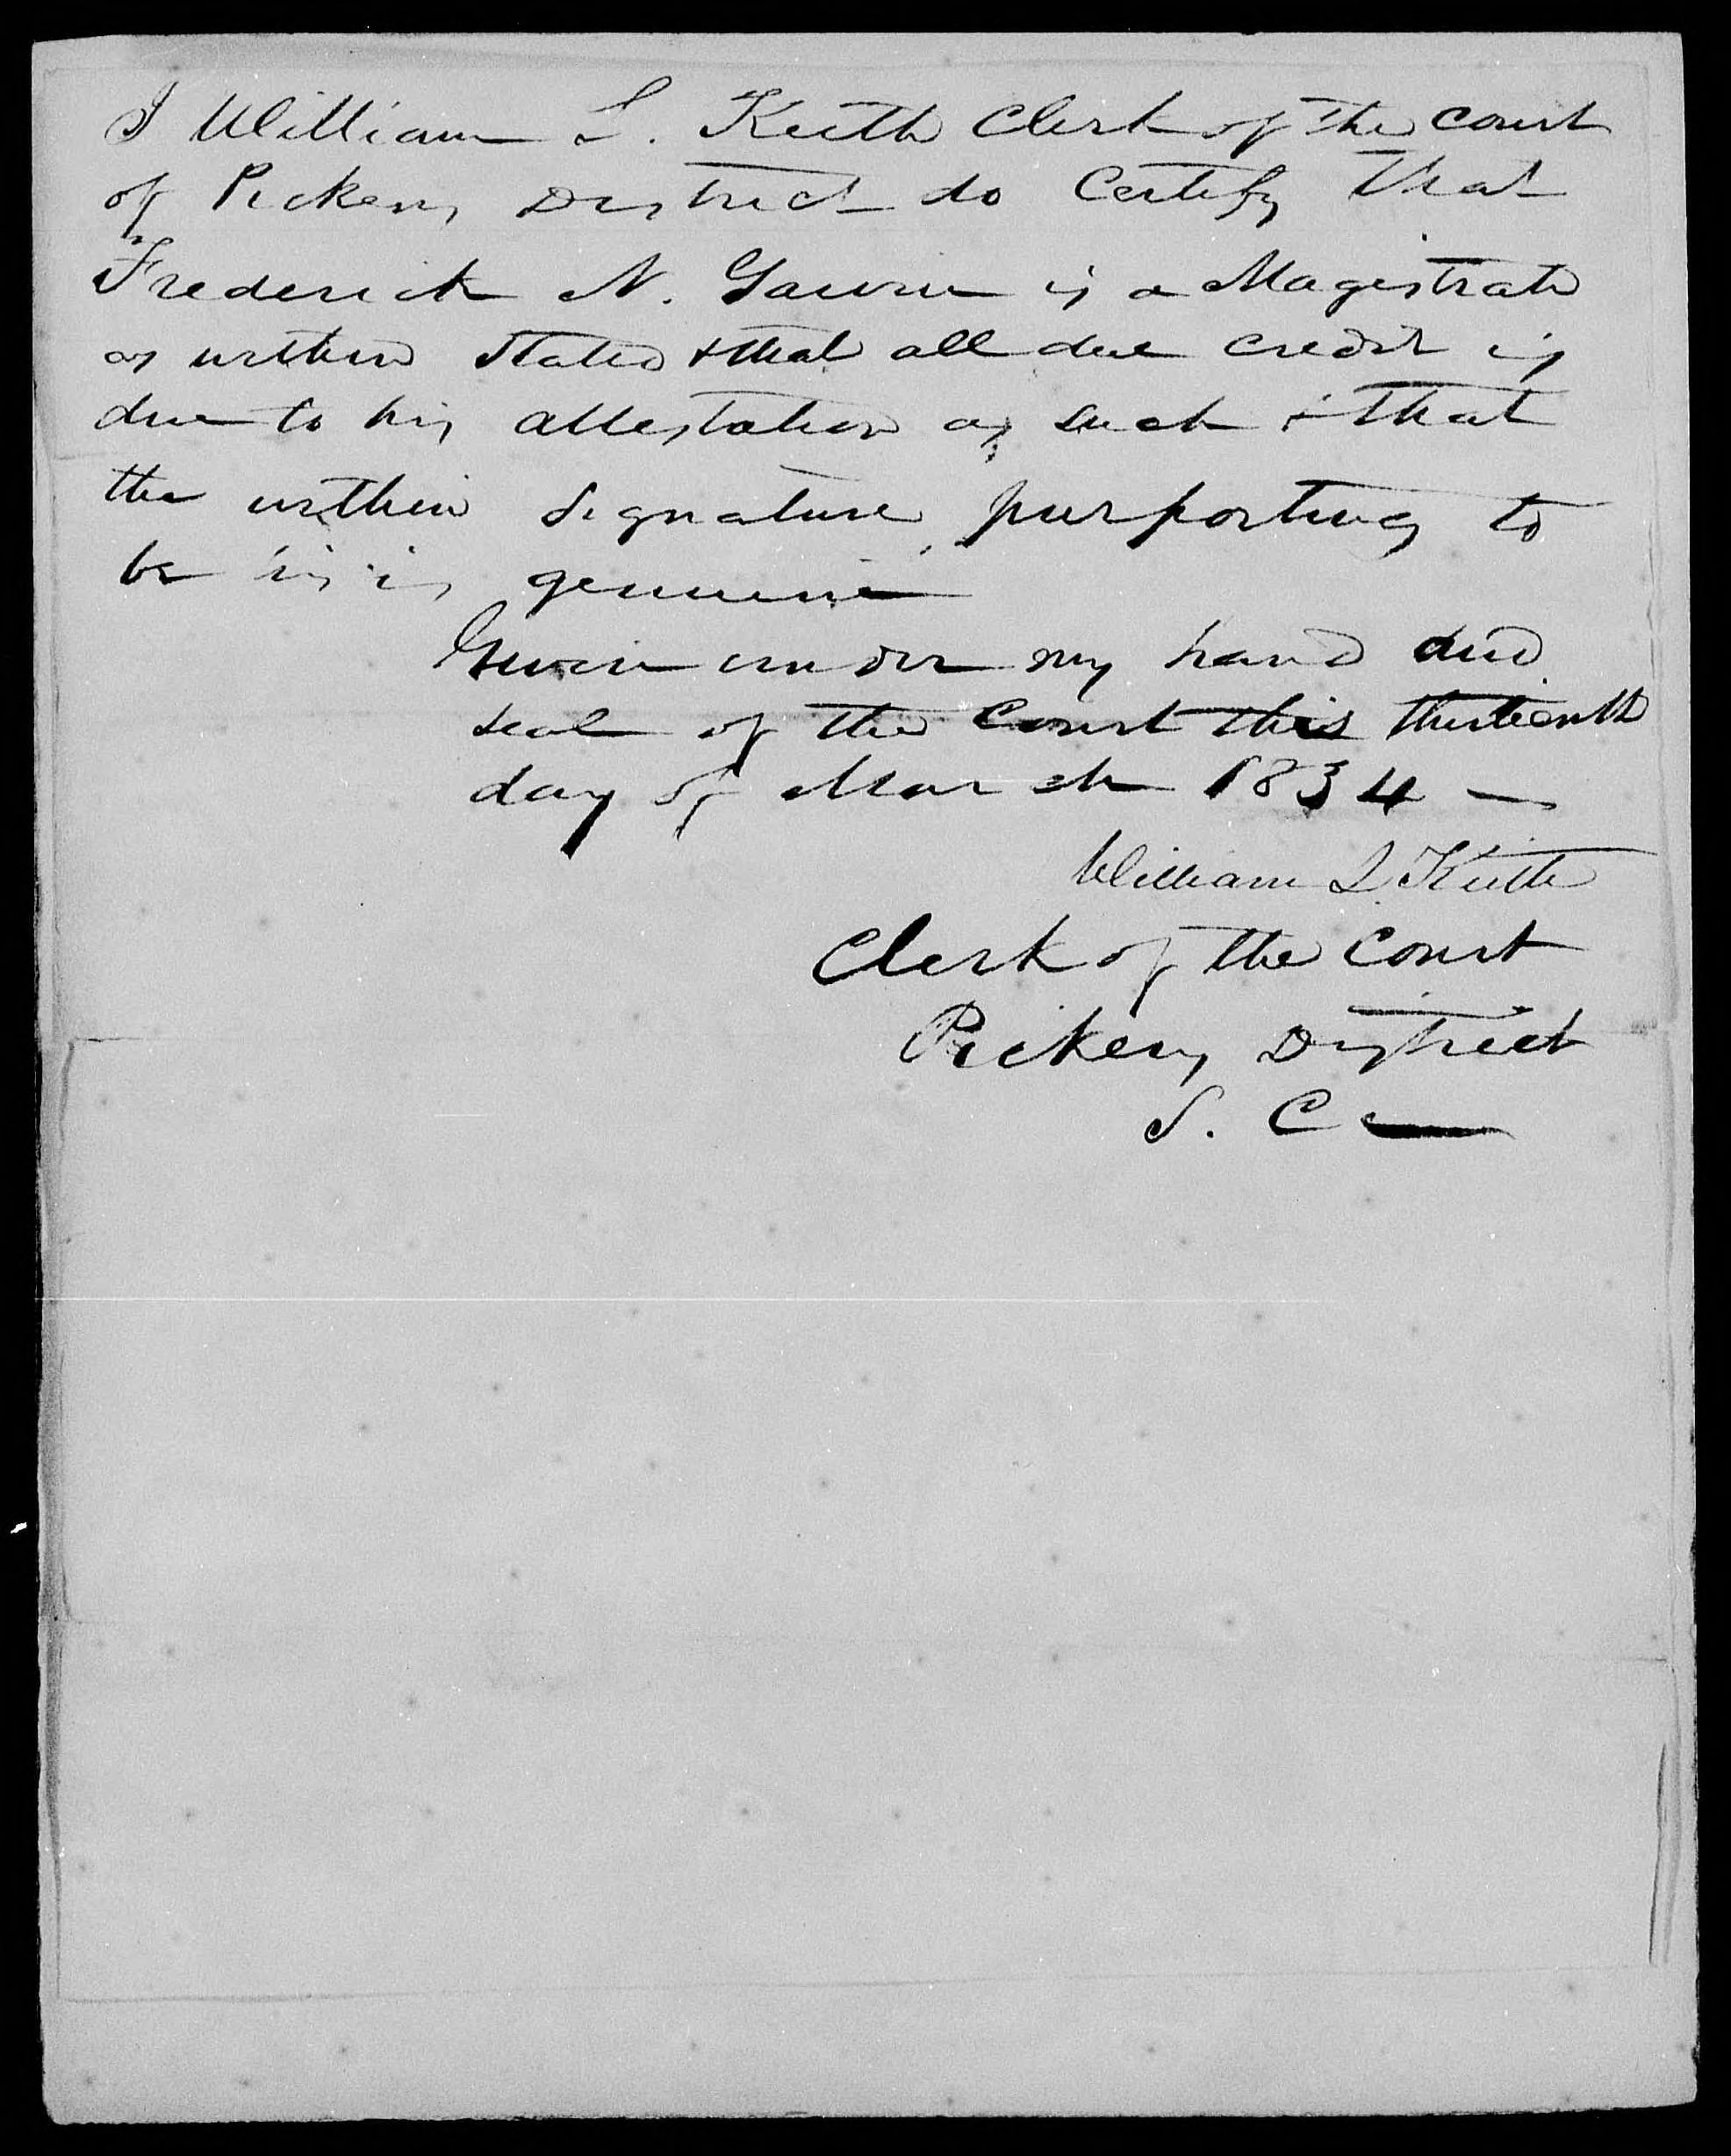 Affidavit of William Barton in support of a Pension Claim for William Guest, 10 March 1834, page 2